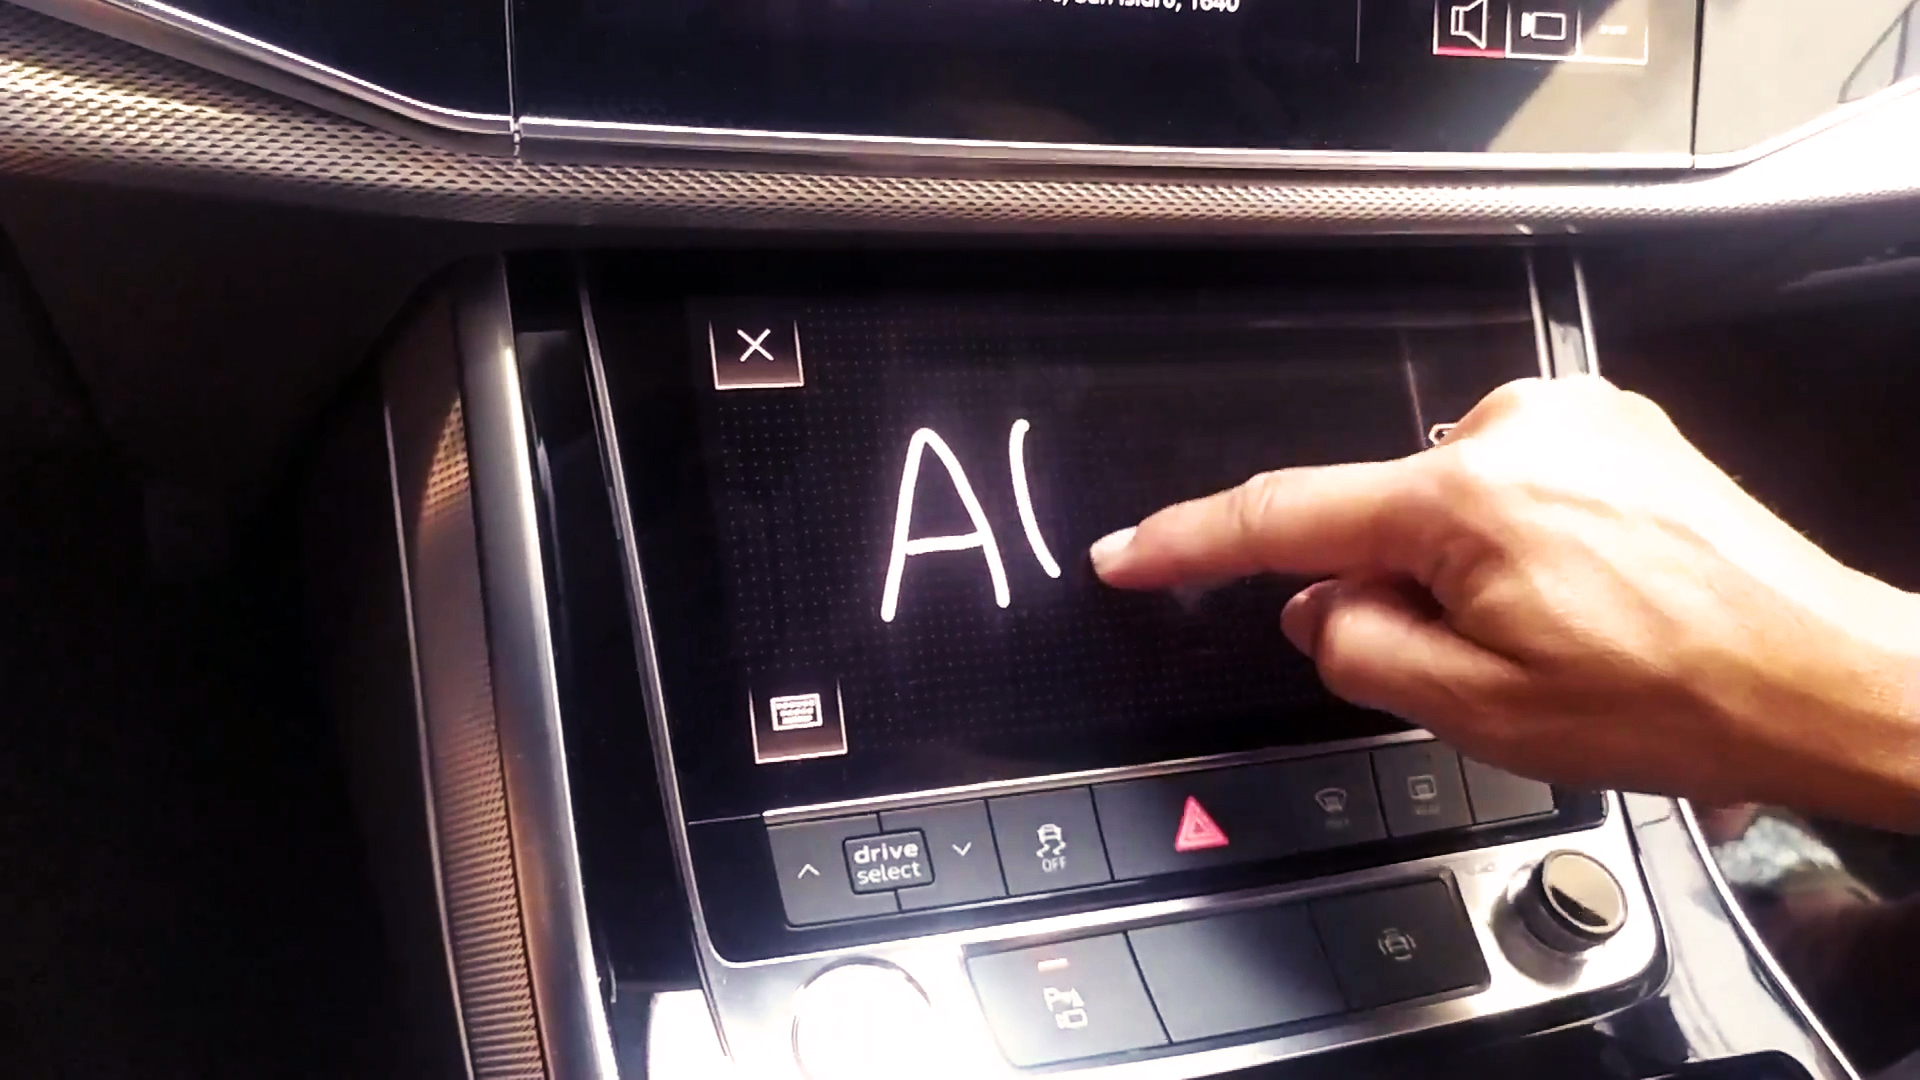 Full touch screens also cause problems to operate them with cars in motion